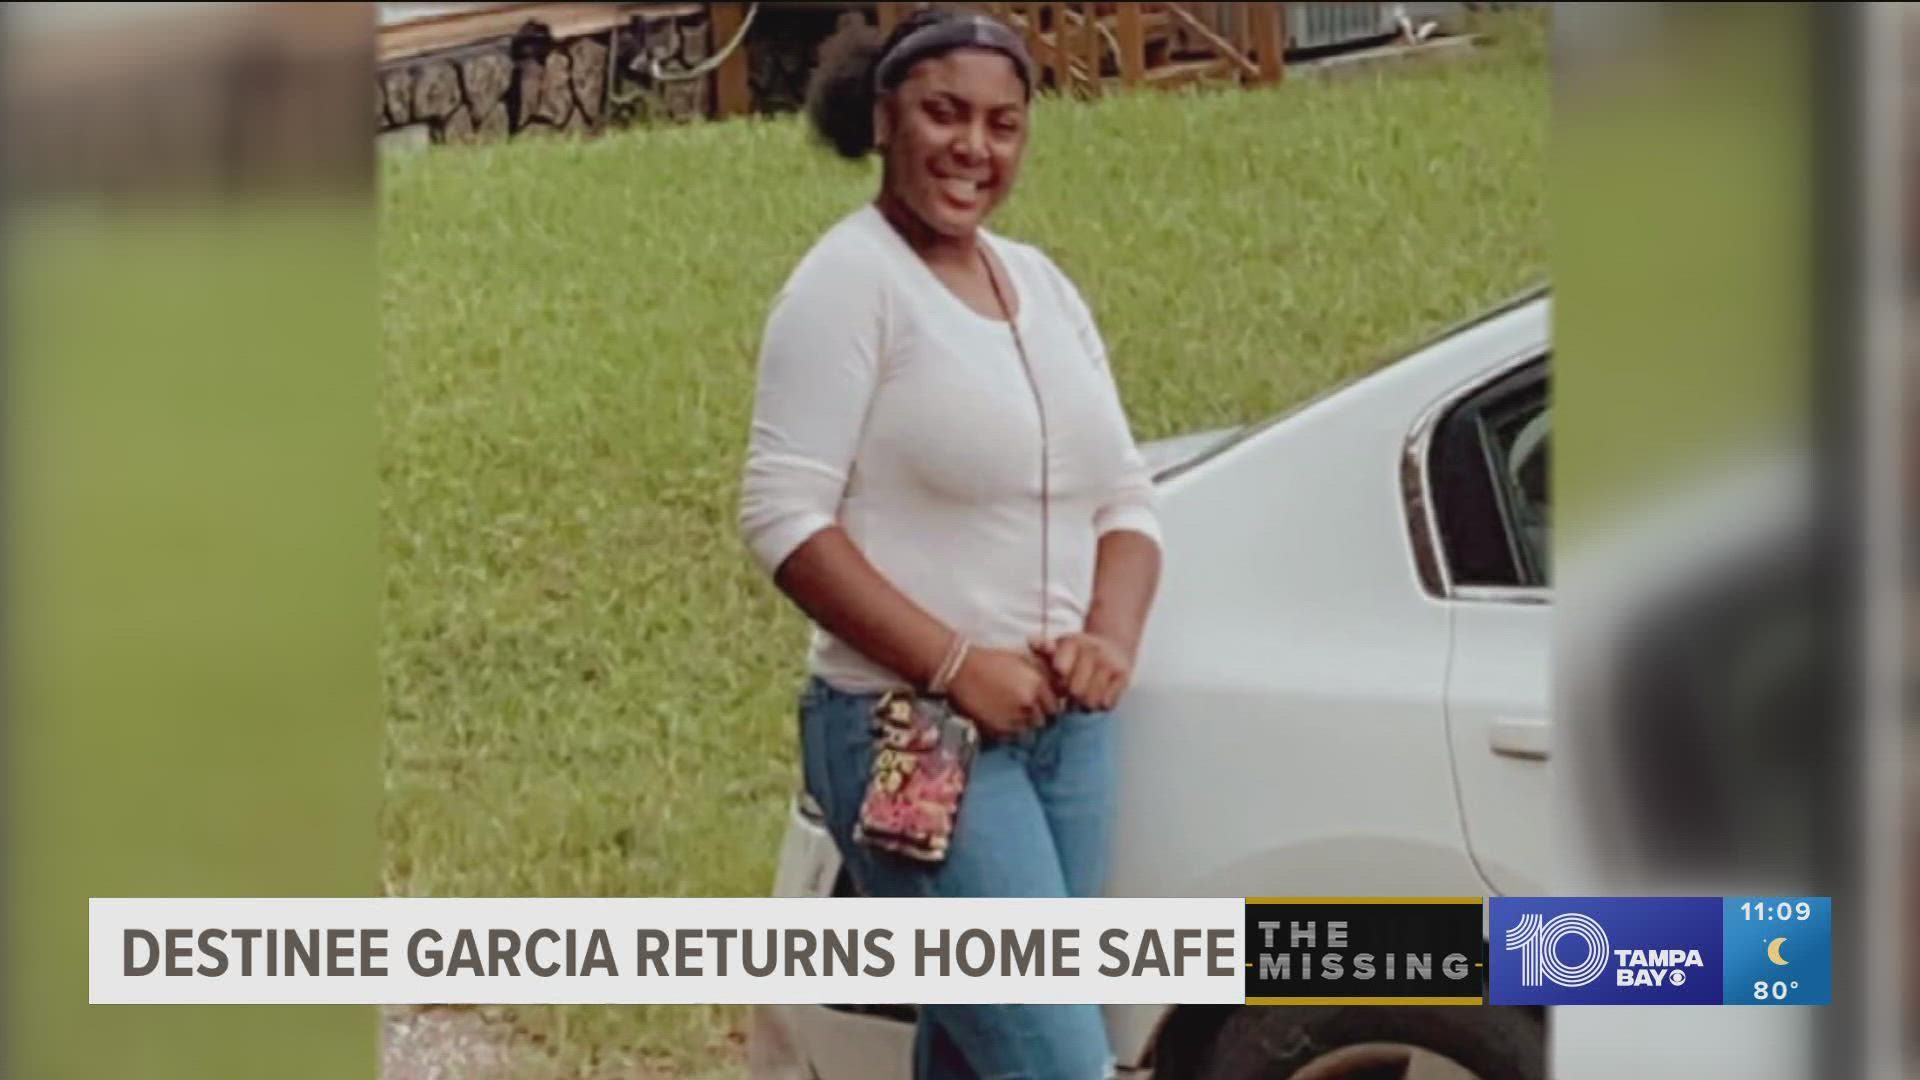 Her family confirmed she is back home.